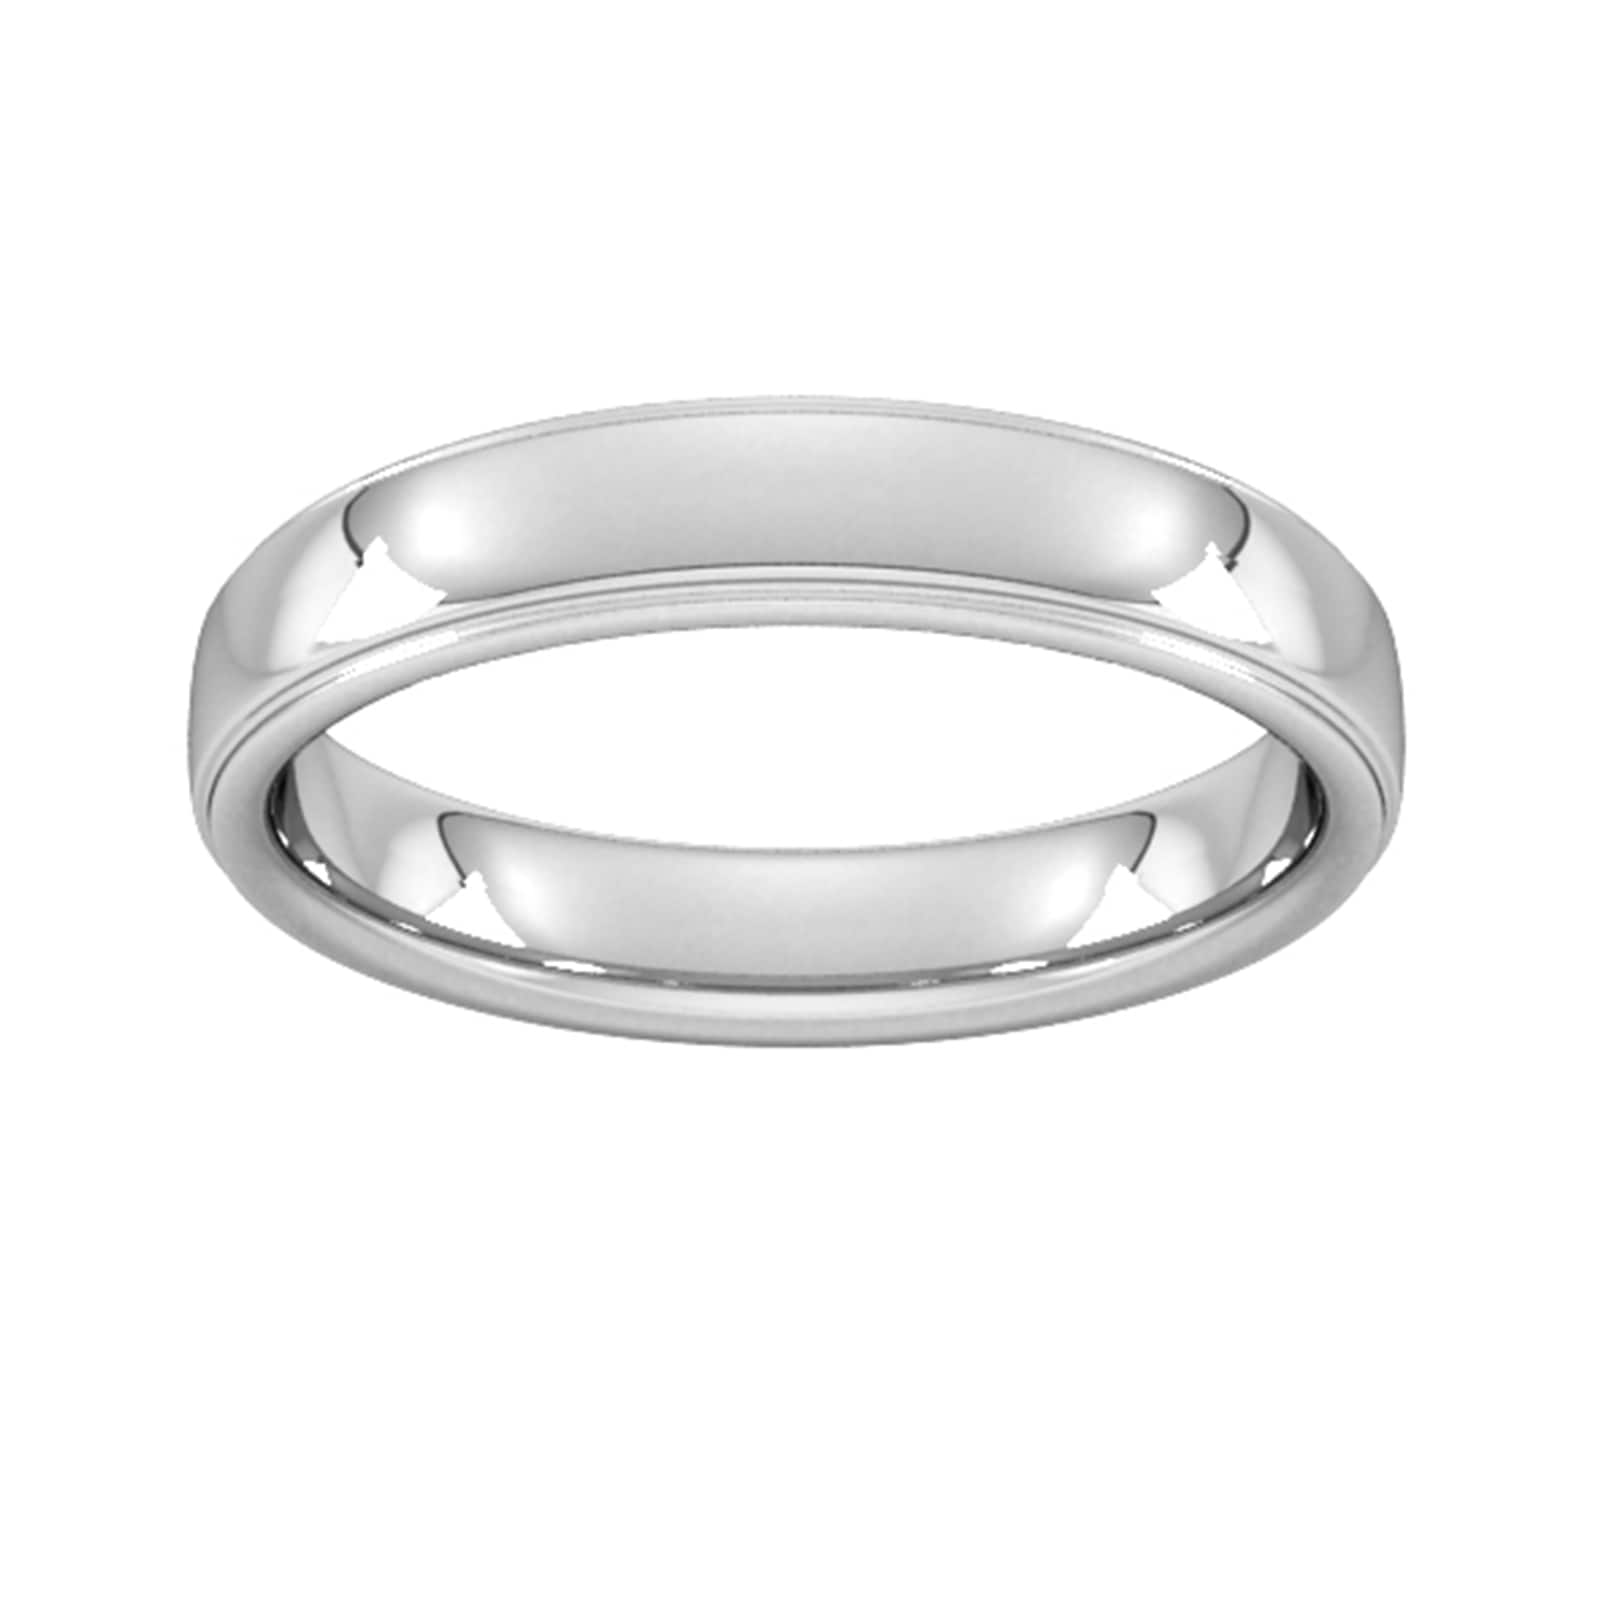 4mm Slight Court Extra Heavy Polished Finish With Grooves Wedding Ring In 950 Palladium - Ring Size G